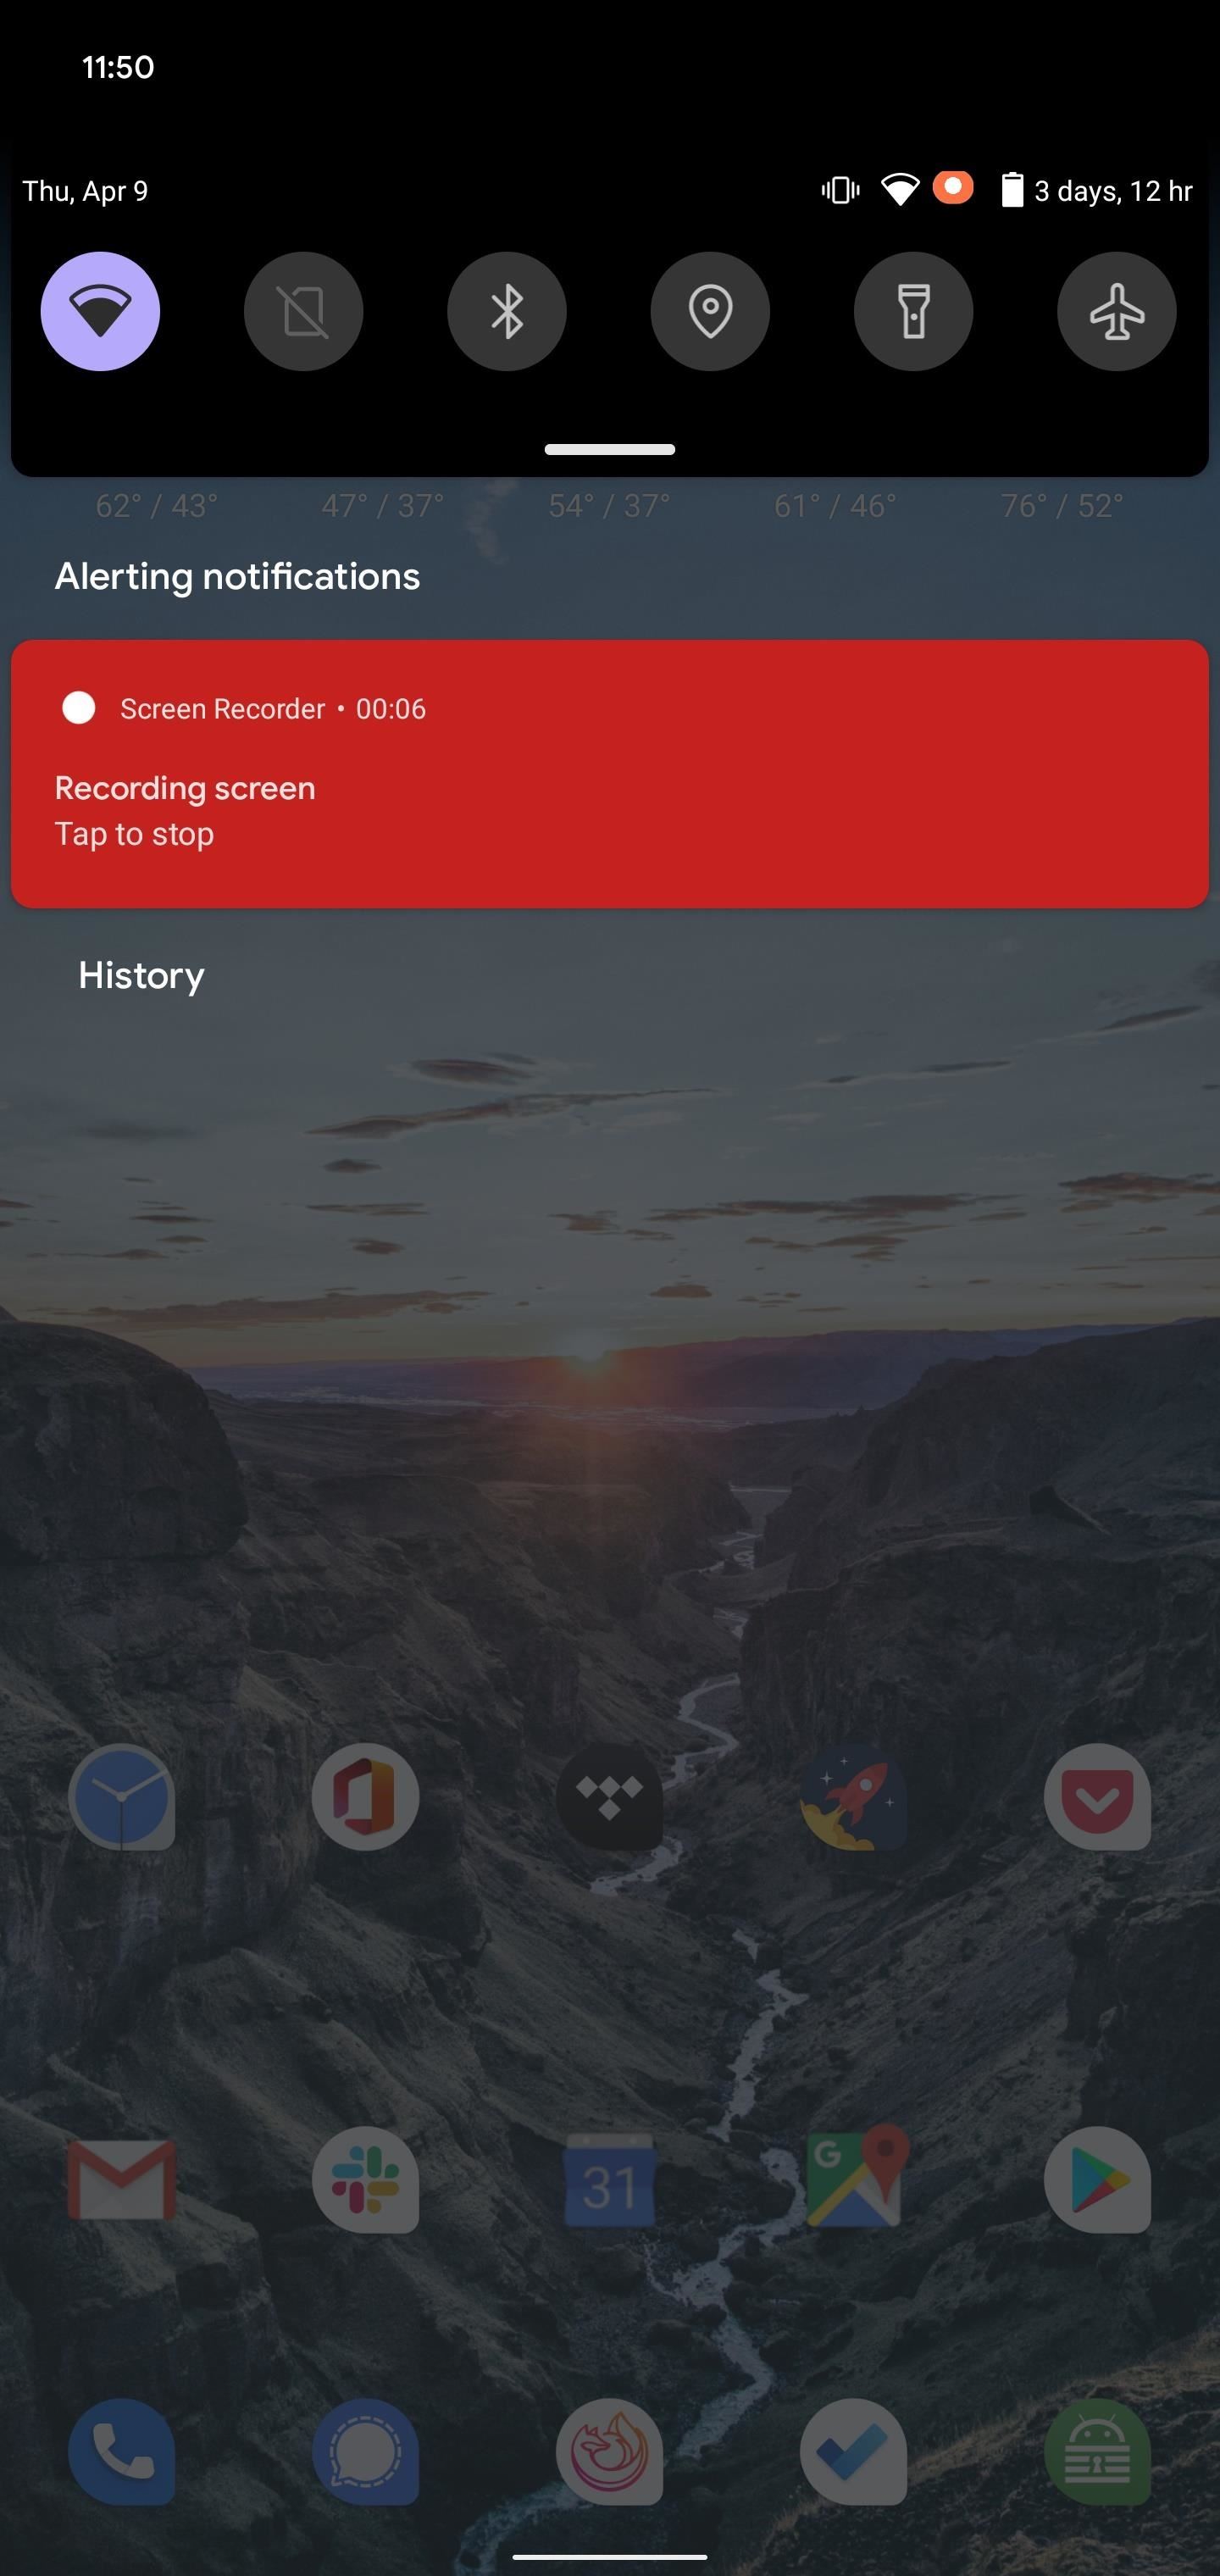 How to Use the Built-in Screen Recorder in Android 11